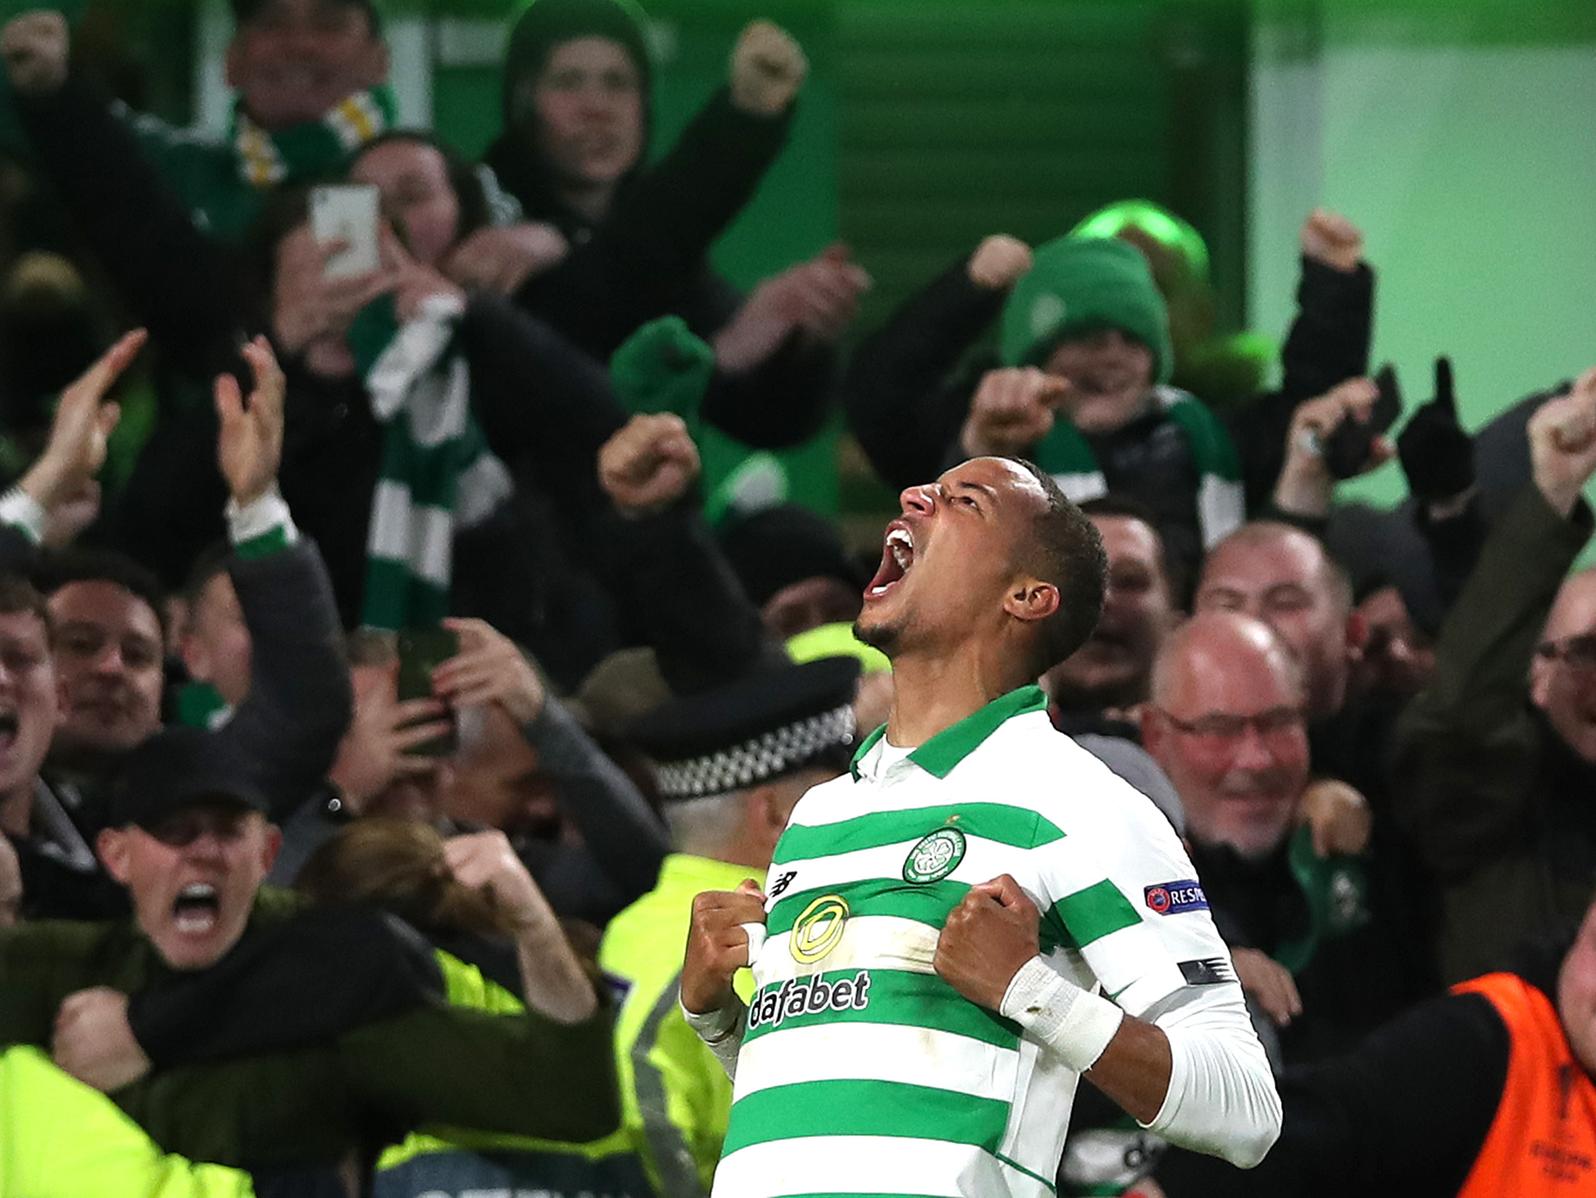 Jubilation is etched on Christopher Jullien's face as he celebrates his winner with the Hoops fans